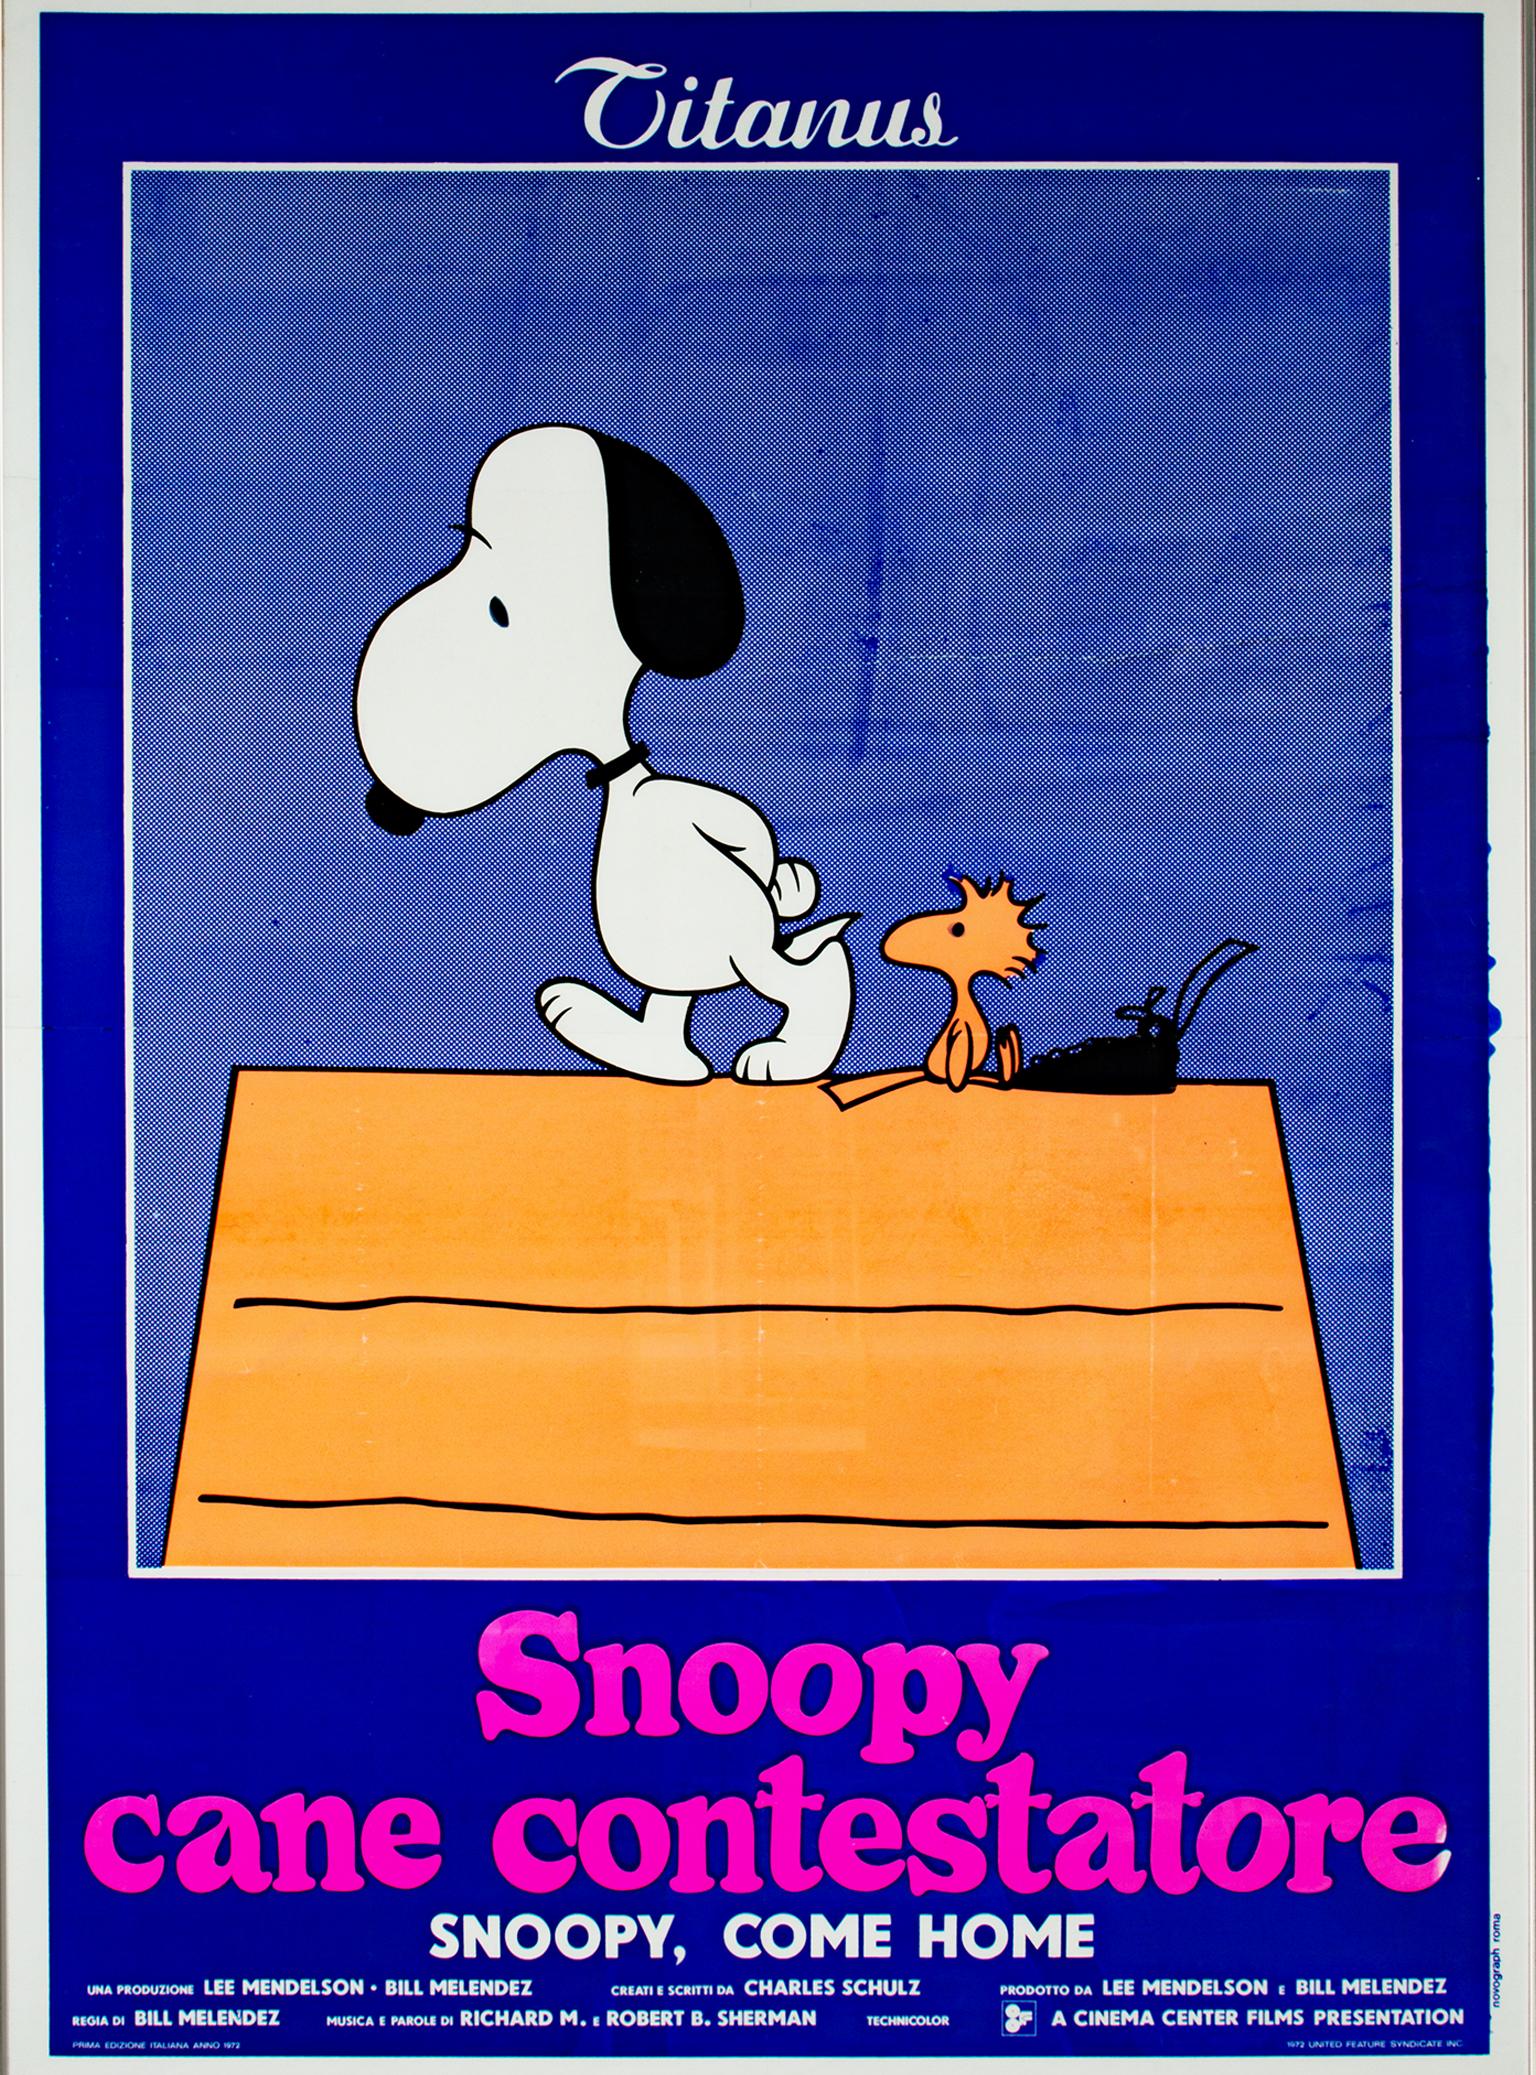 "Snoopy Come Home, " Original Lithograph Poster by Charles Schulz